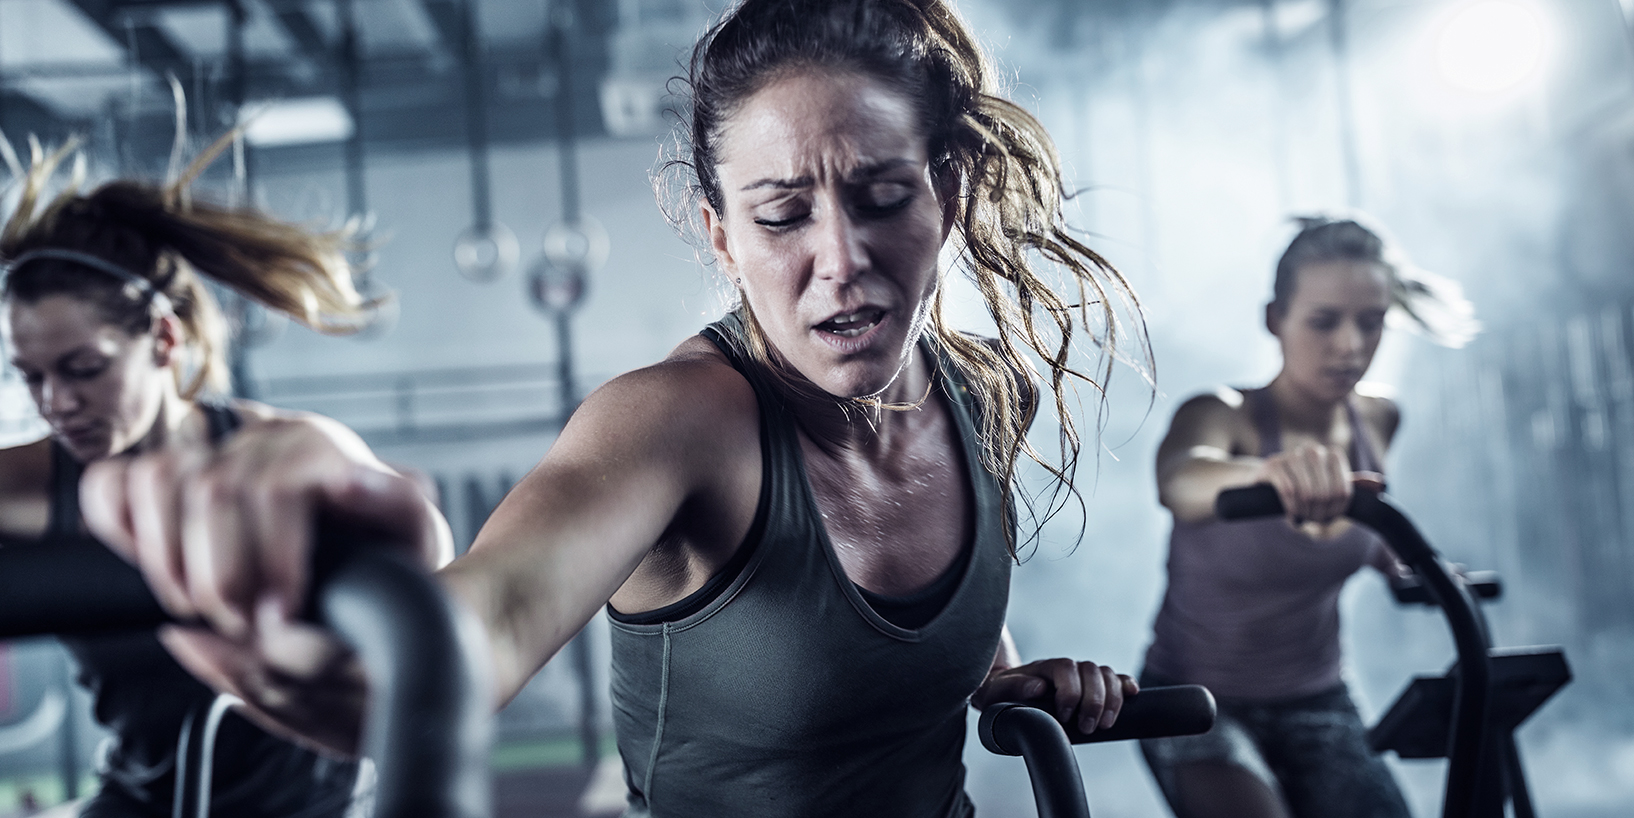 woman sweating while working out